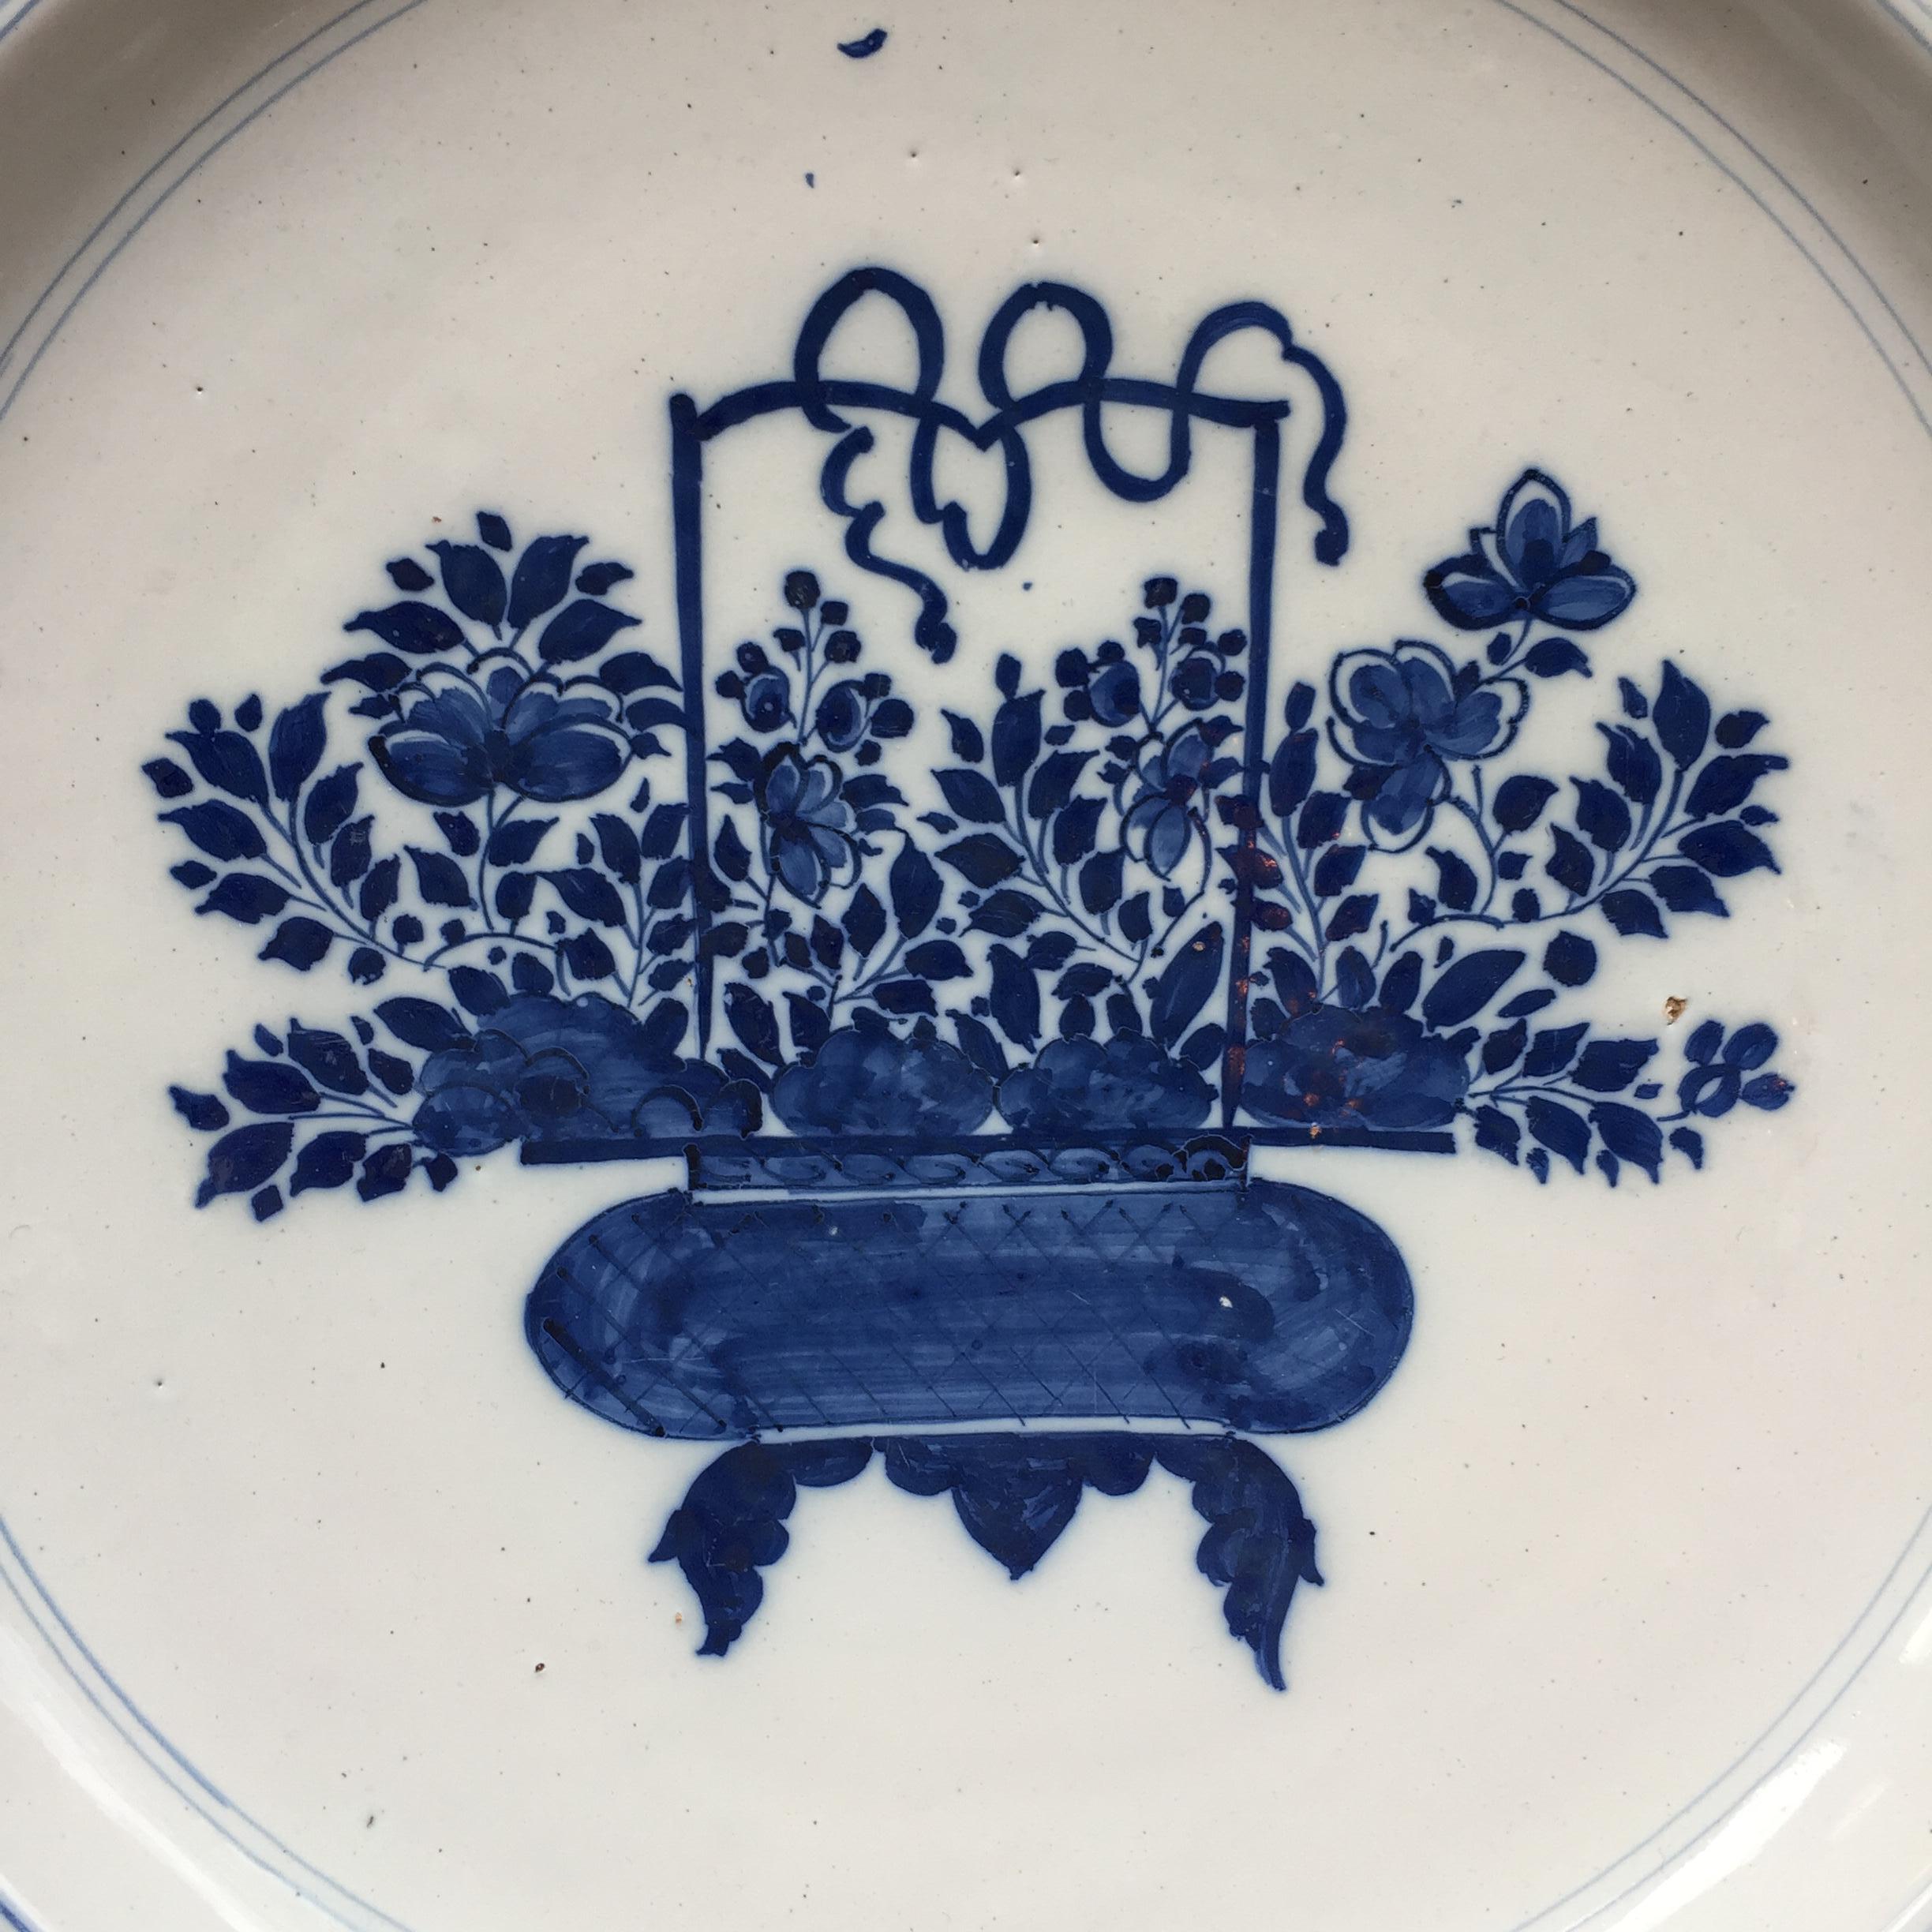 City: Delft
Workshop: Unknown
Date: circa 1700 - 1750

A fine blue and white plate with decoration of a Chinese flower basket.
Inspired on the Chinese Kangxi porcelain.
With a small border decorated with branches

Unmarked

Provenance: Morpurgo